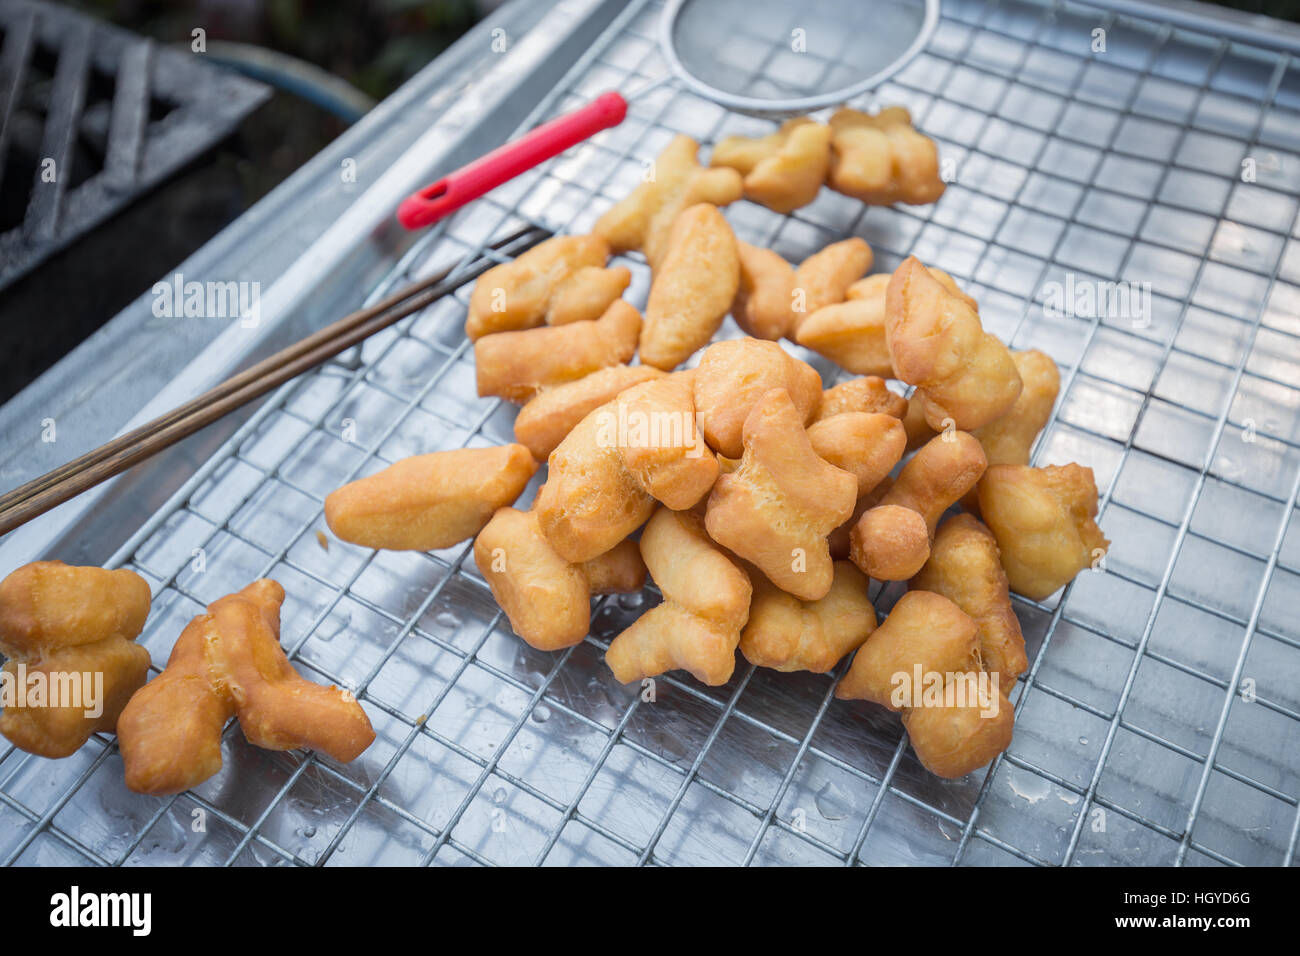 Close focus on deep fried dough stick put on grille of stainless steel tray for preparing to serve. Stock Photo